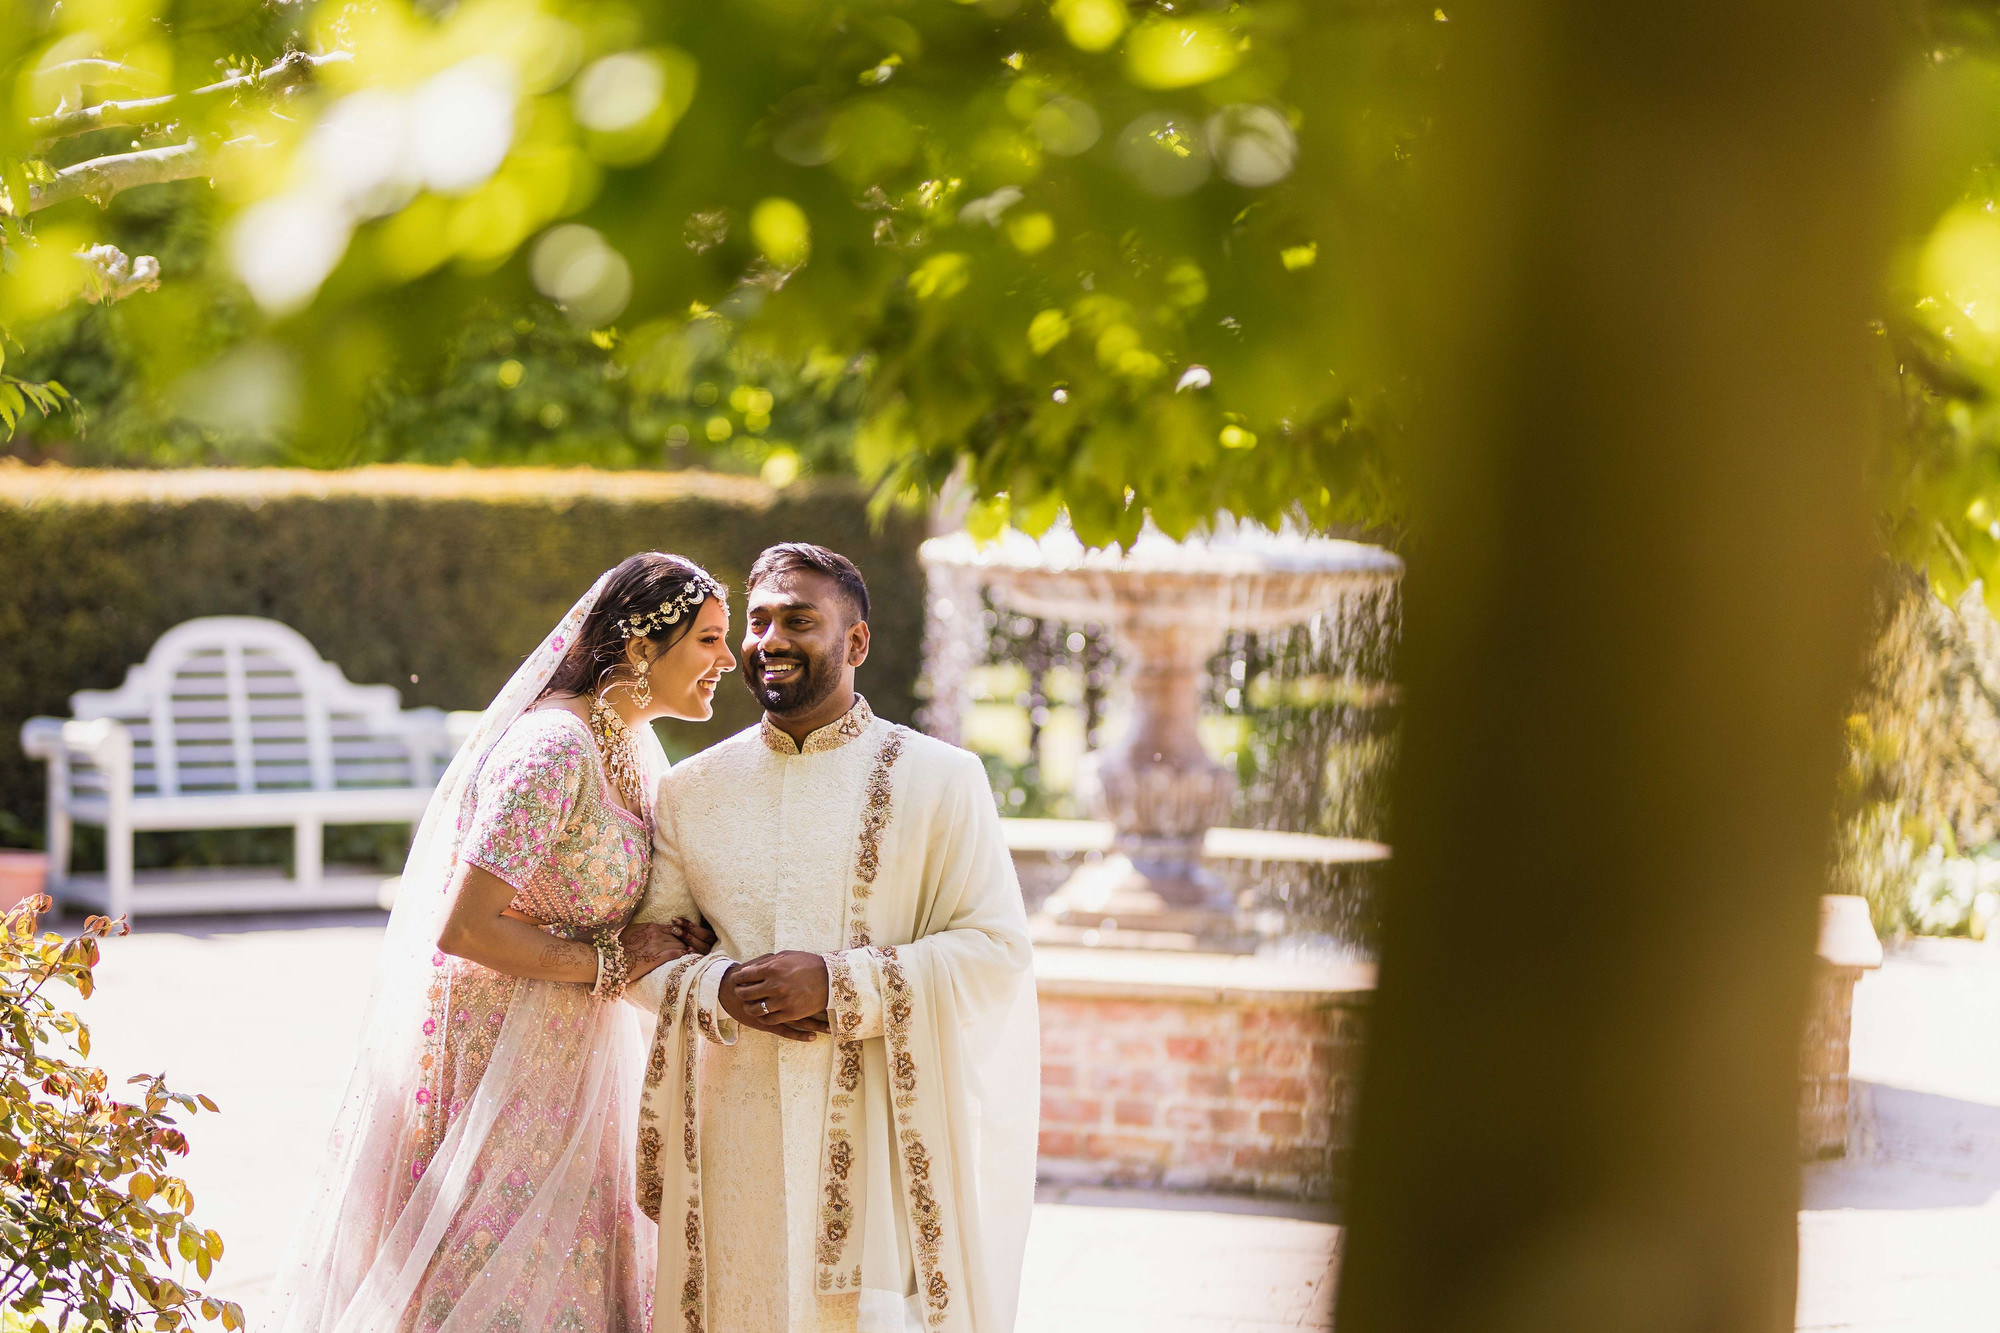 Asian Wedding Photographer in Essex, Braxted Park, couples portrait